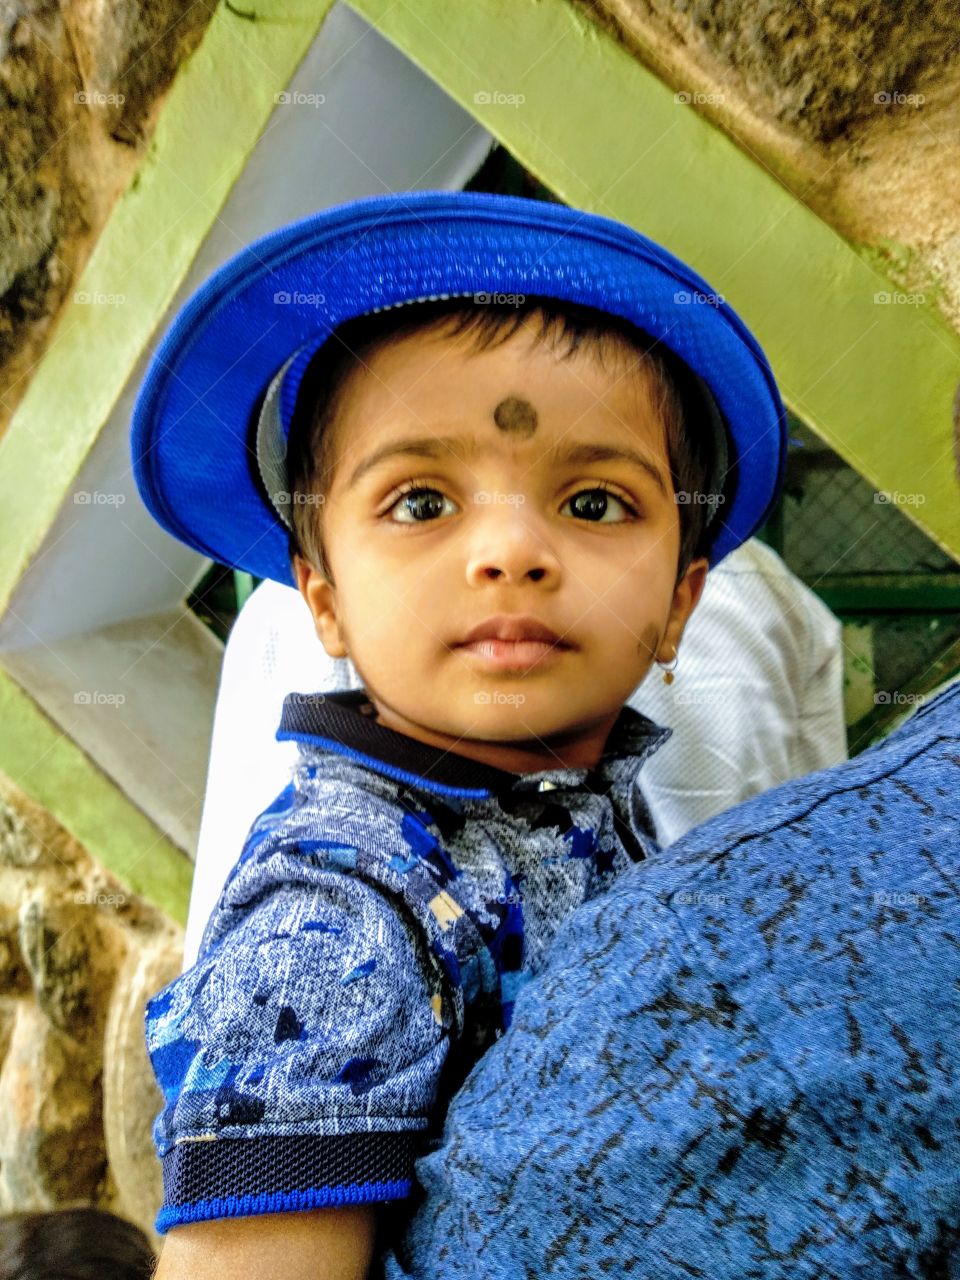 This child really awesome...just see his look... really I love it.he with her father,at the time of traveling I captured his photo. I love it.